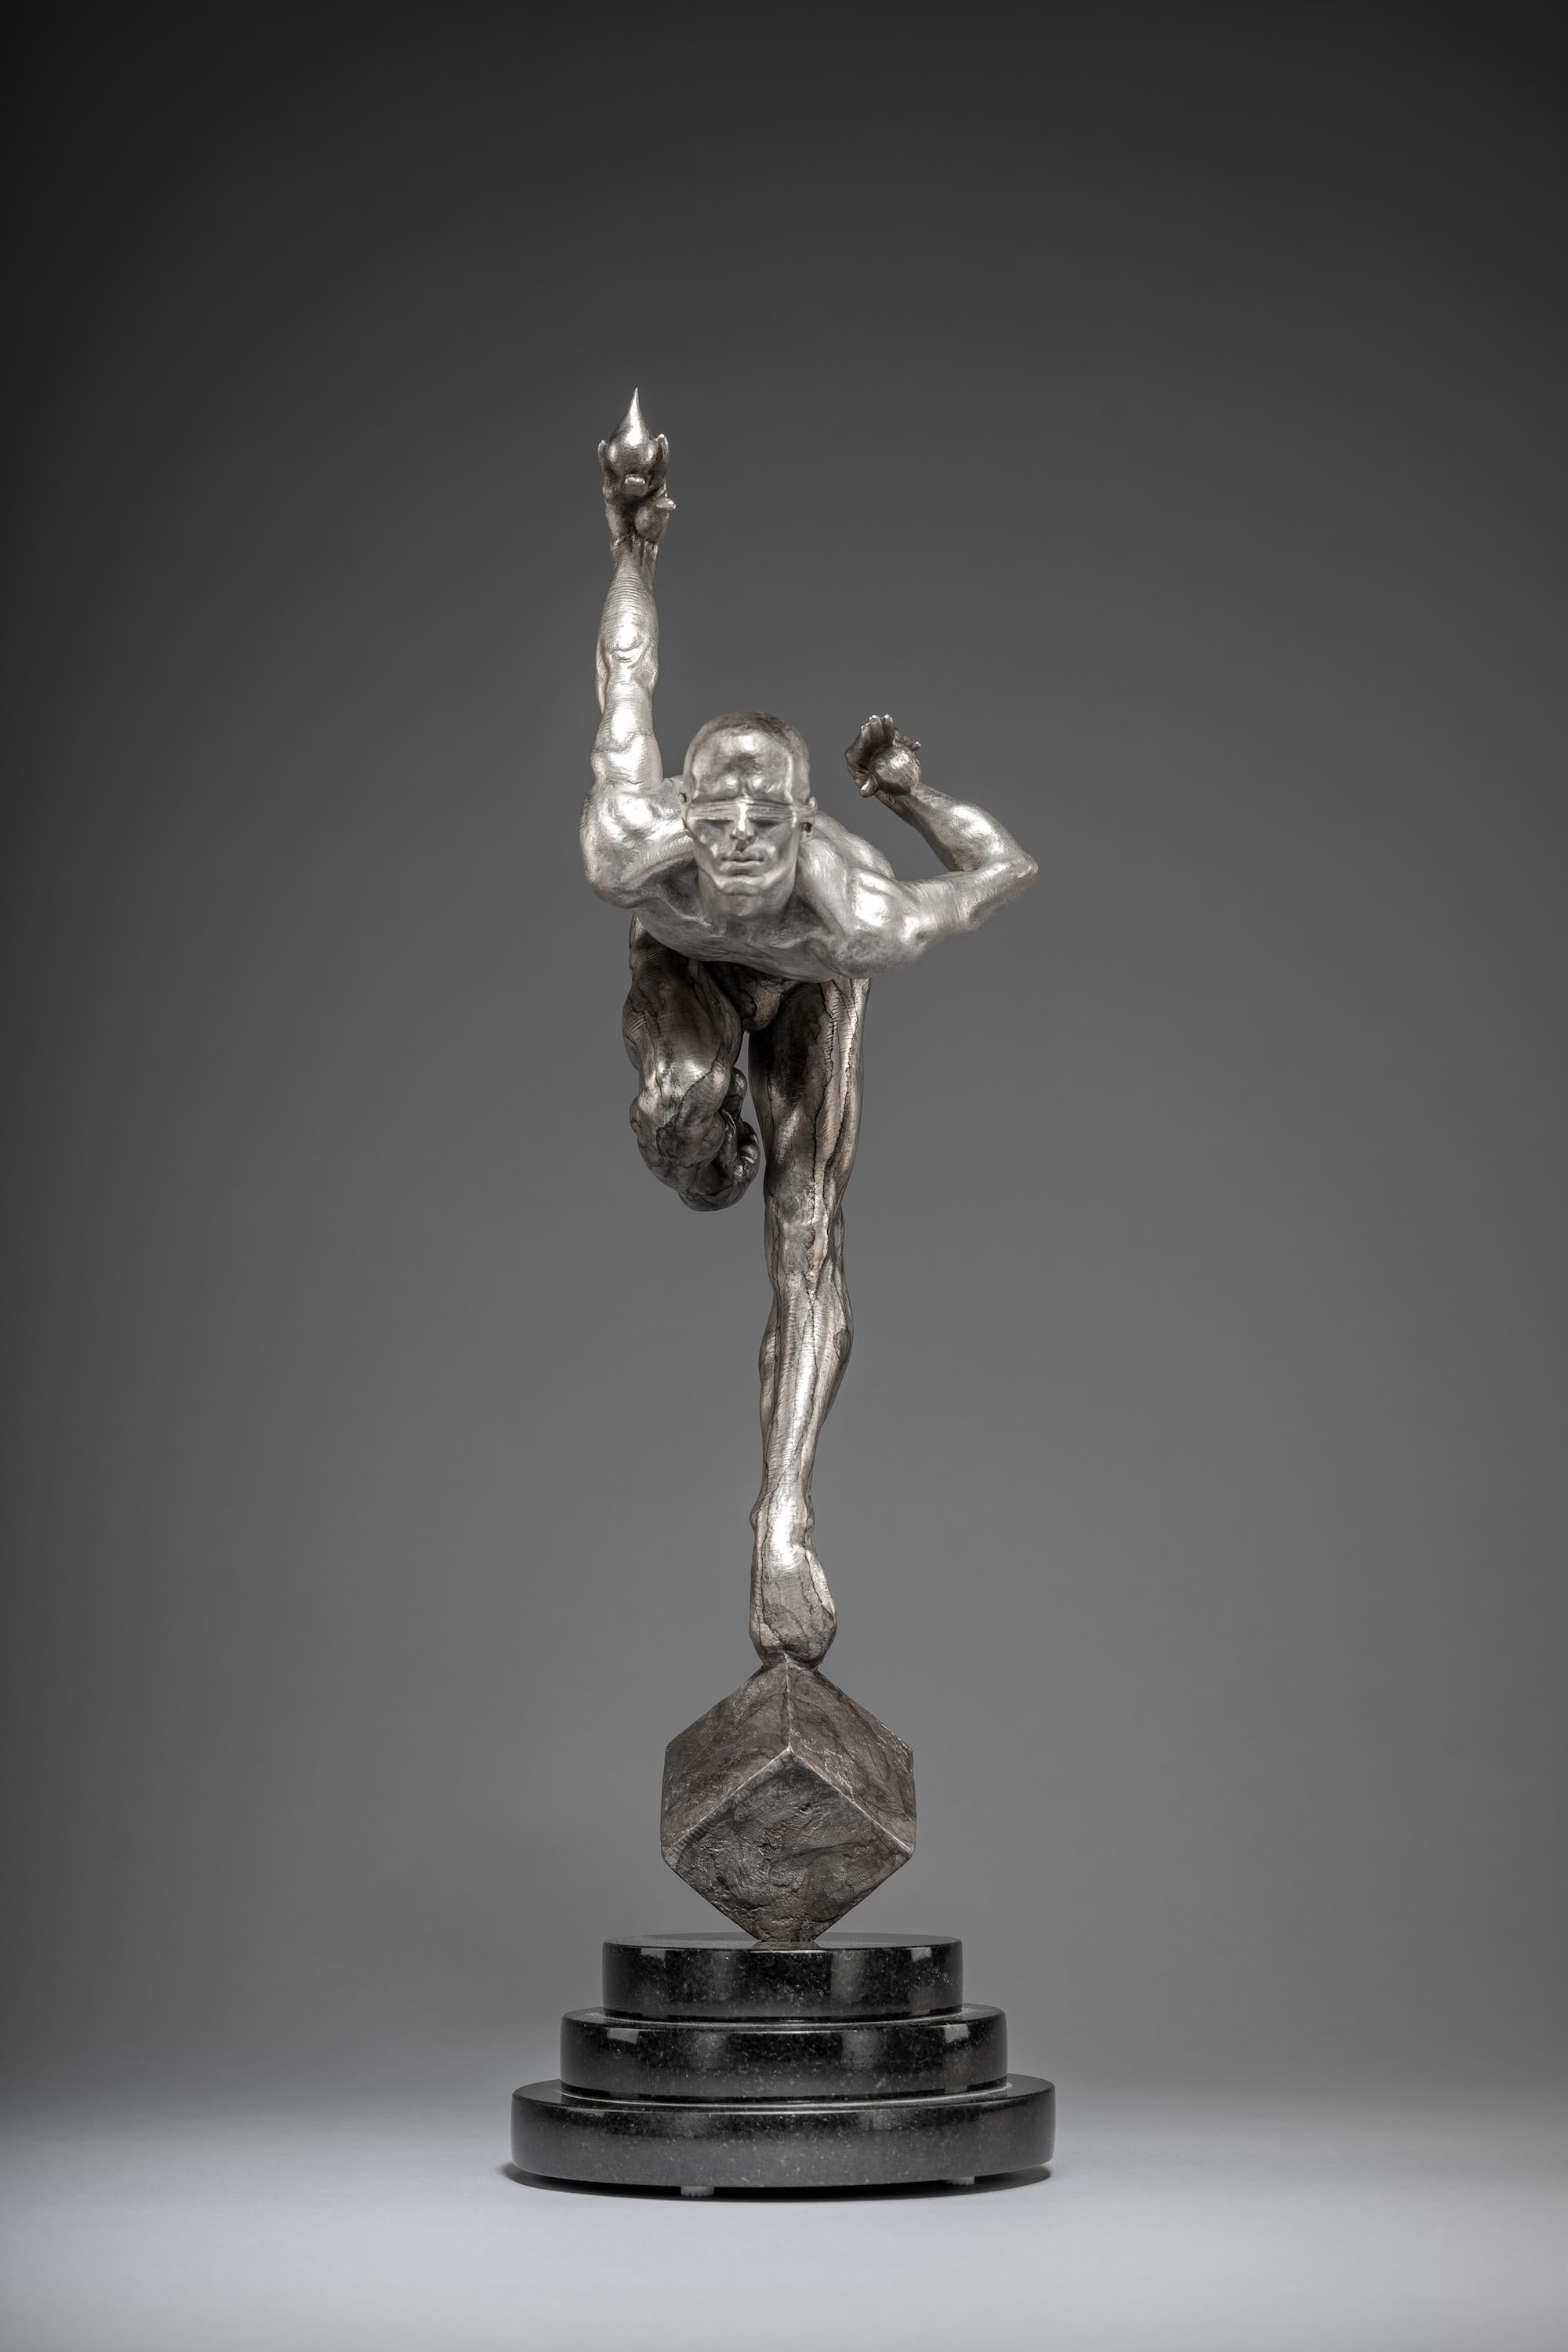 This figure celebrates the creative energy of the human spirit and embodies the idea that the unpredictable nature of life is best tamed with confidence and optimism - a message that reinforces the mission of One Drop. Blind Faith Atelier Platinum